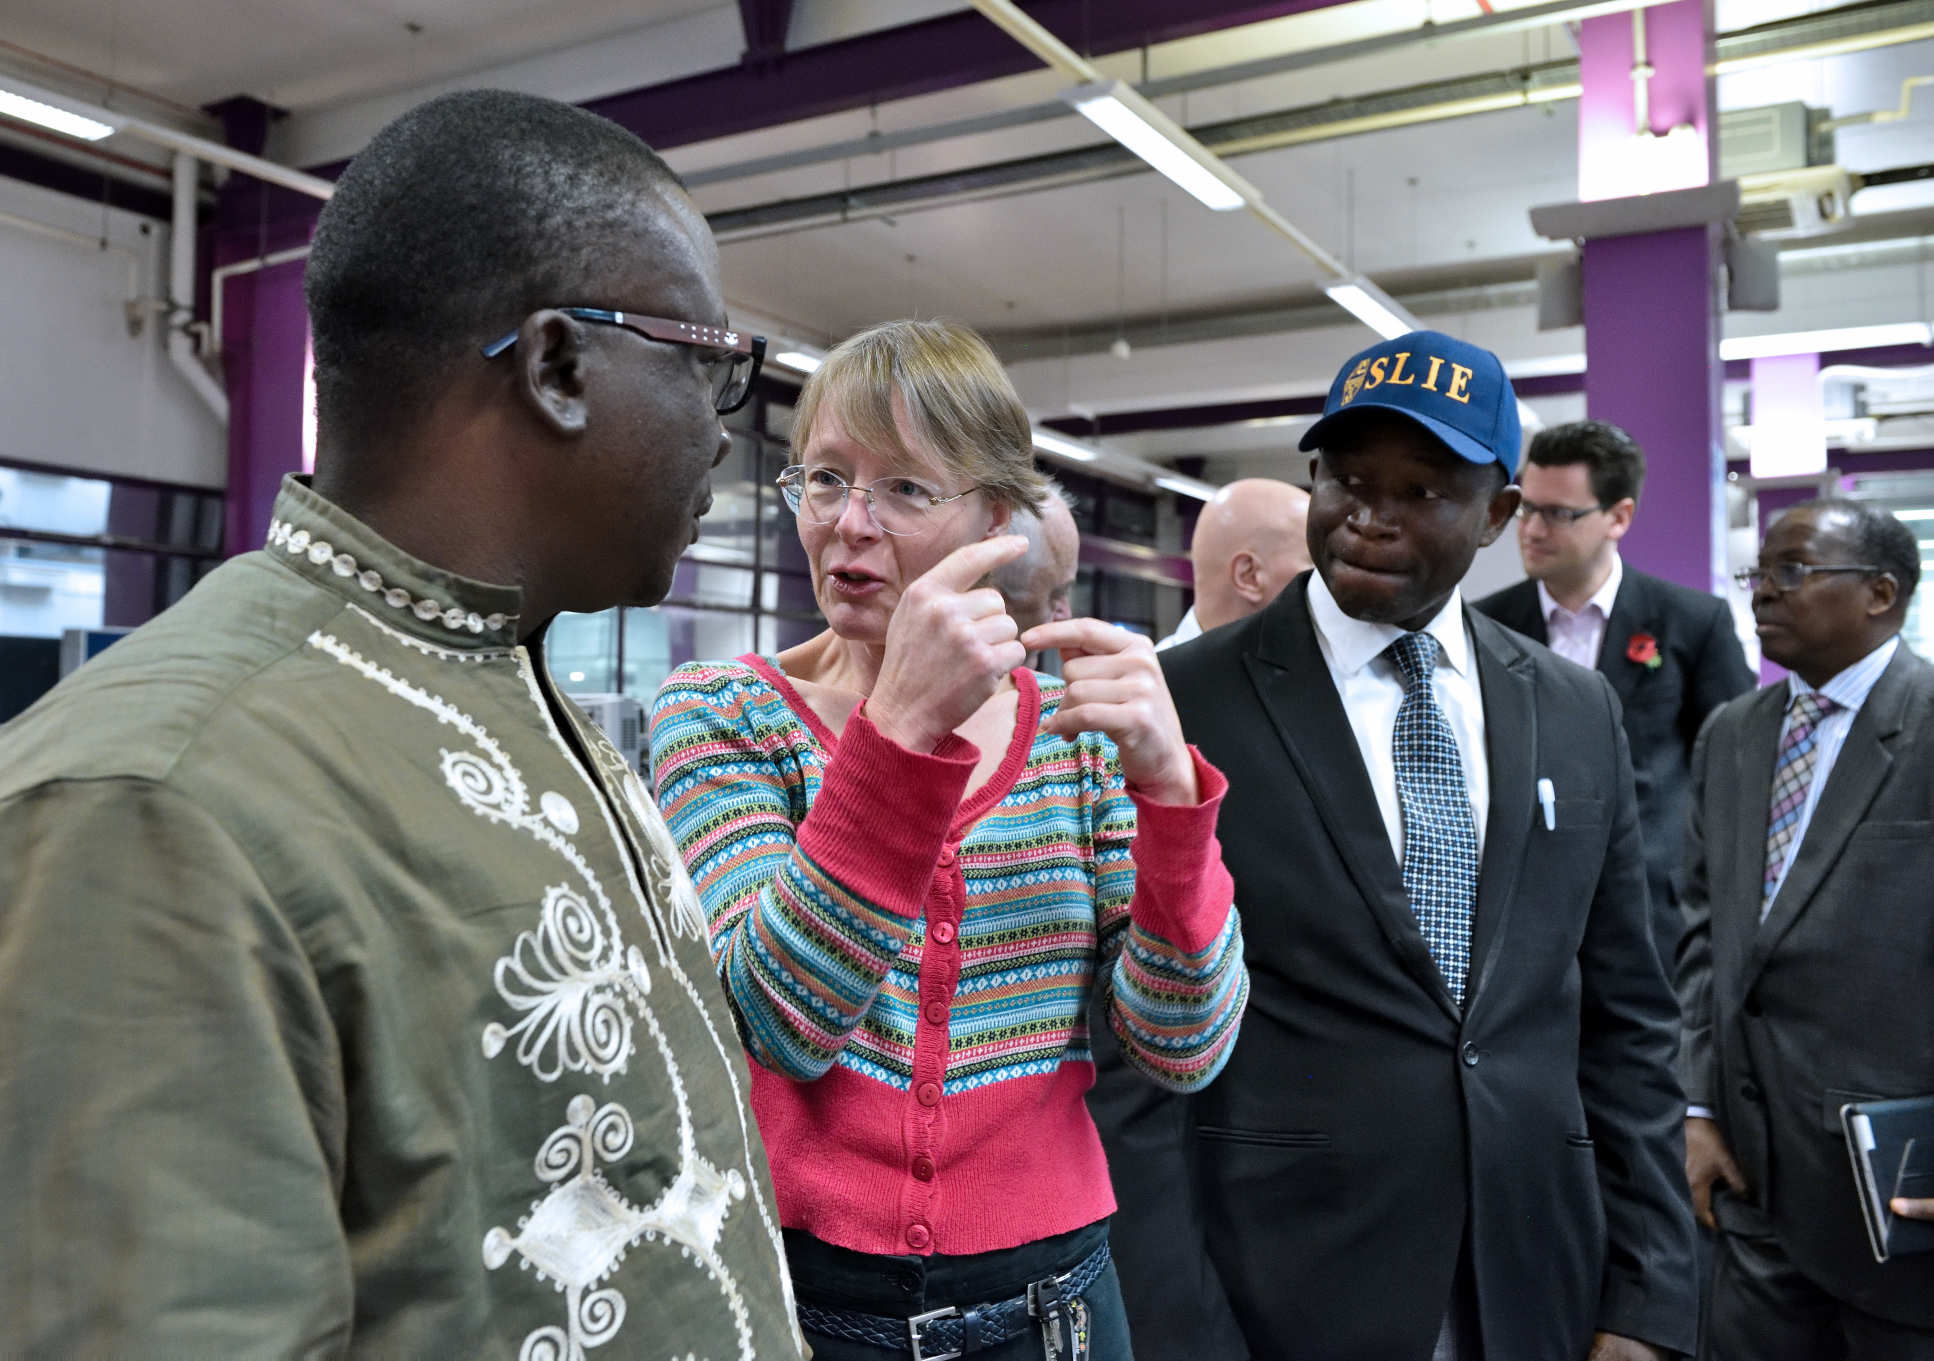 Engineers from Sierra Leone visited Dr Kristel Fobelets's electrical engineering lab